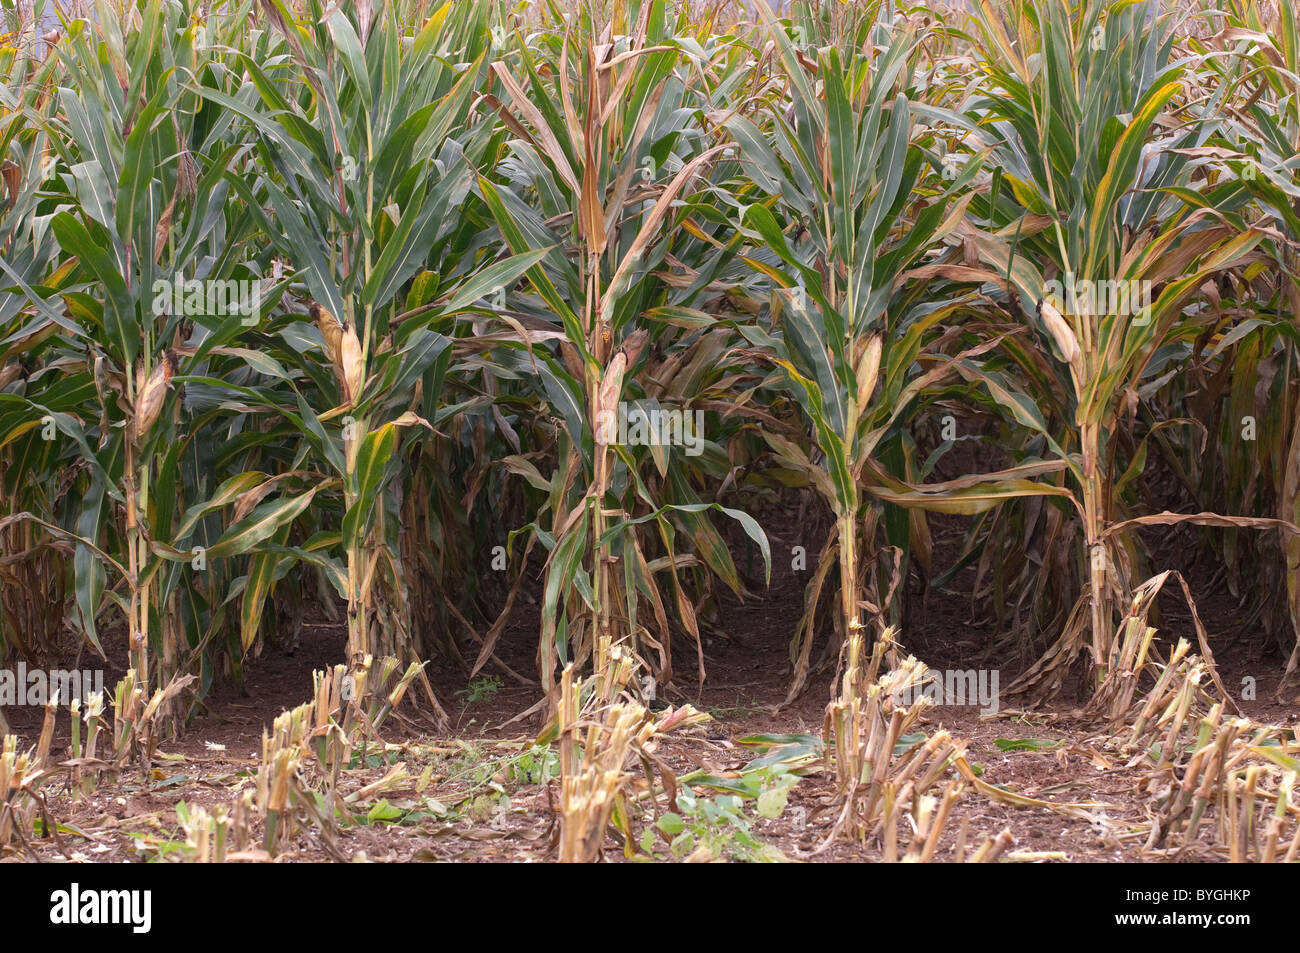 Maize, Corn (Zea mays). View of the row- structure of a maize field. Stock Photo